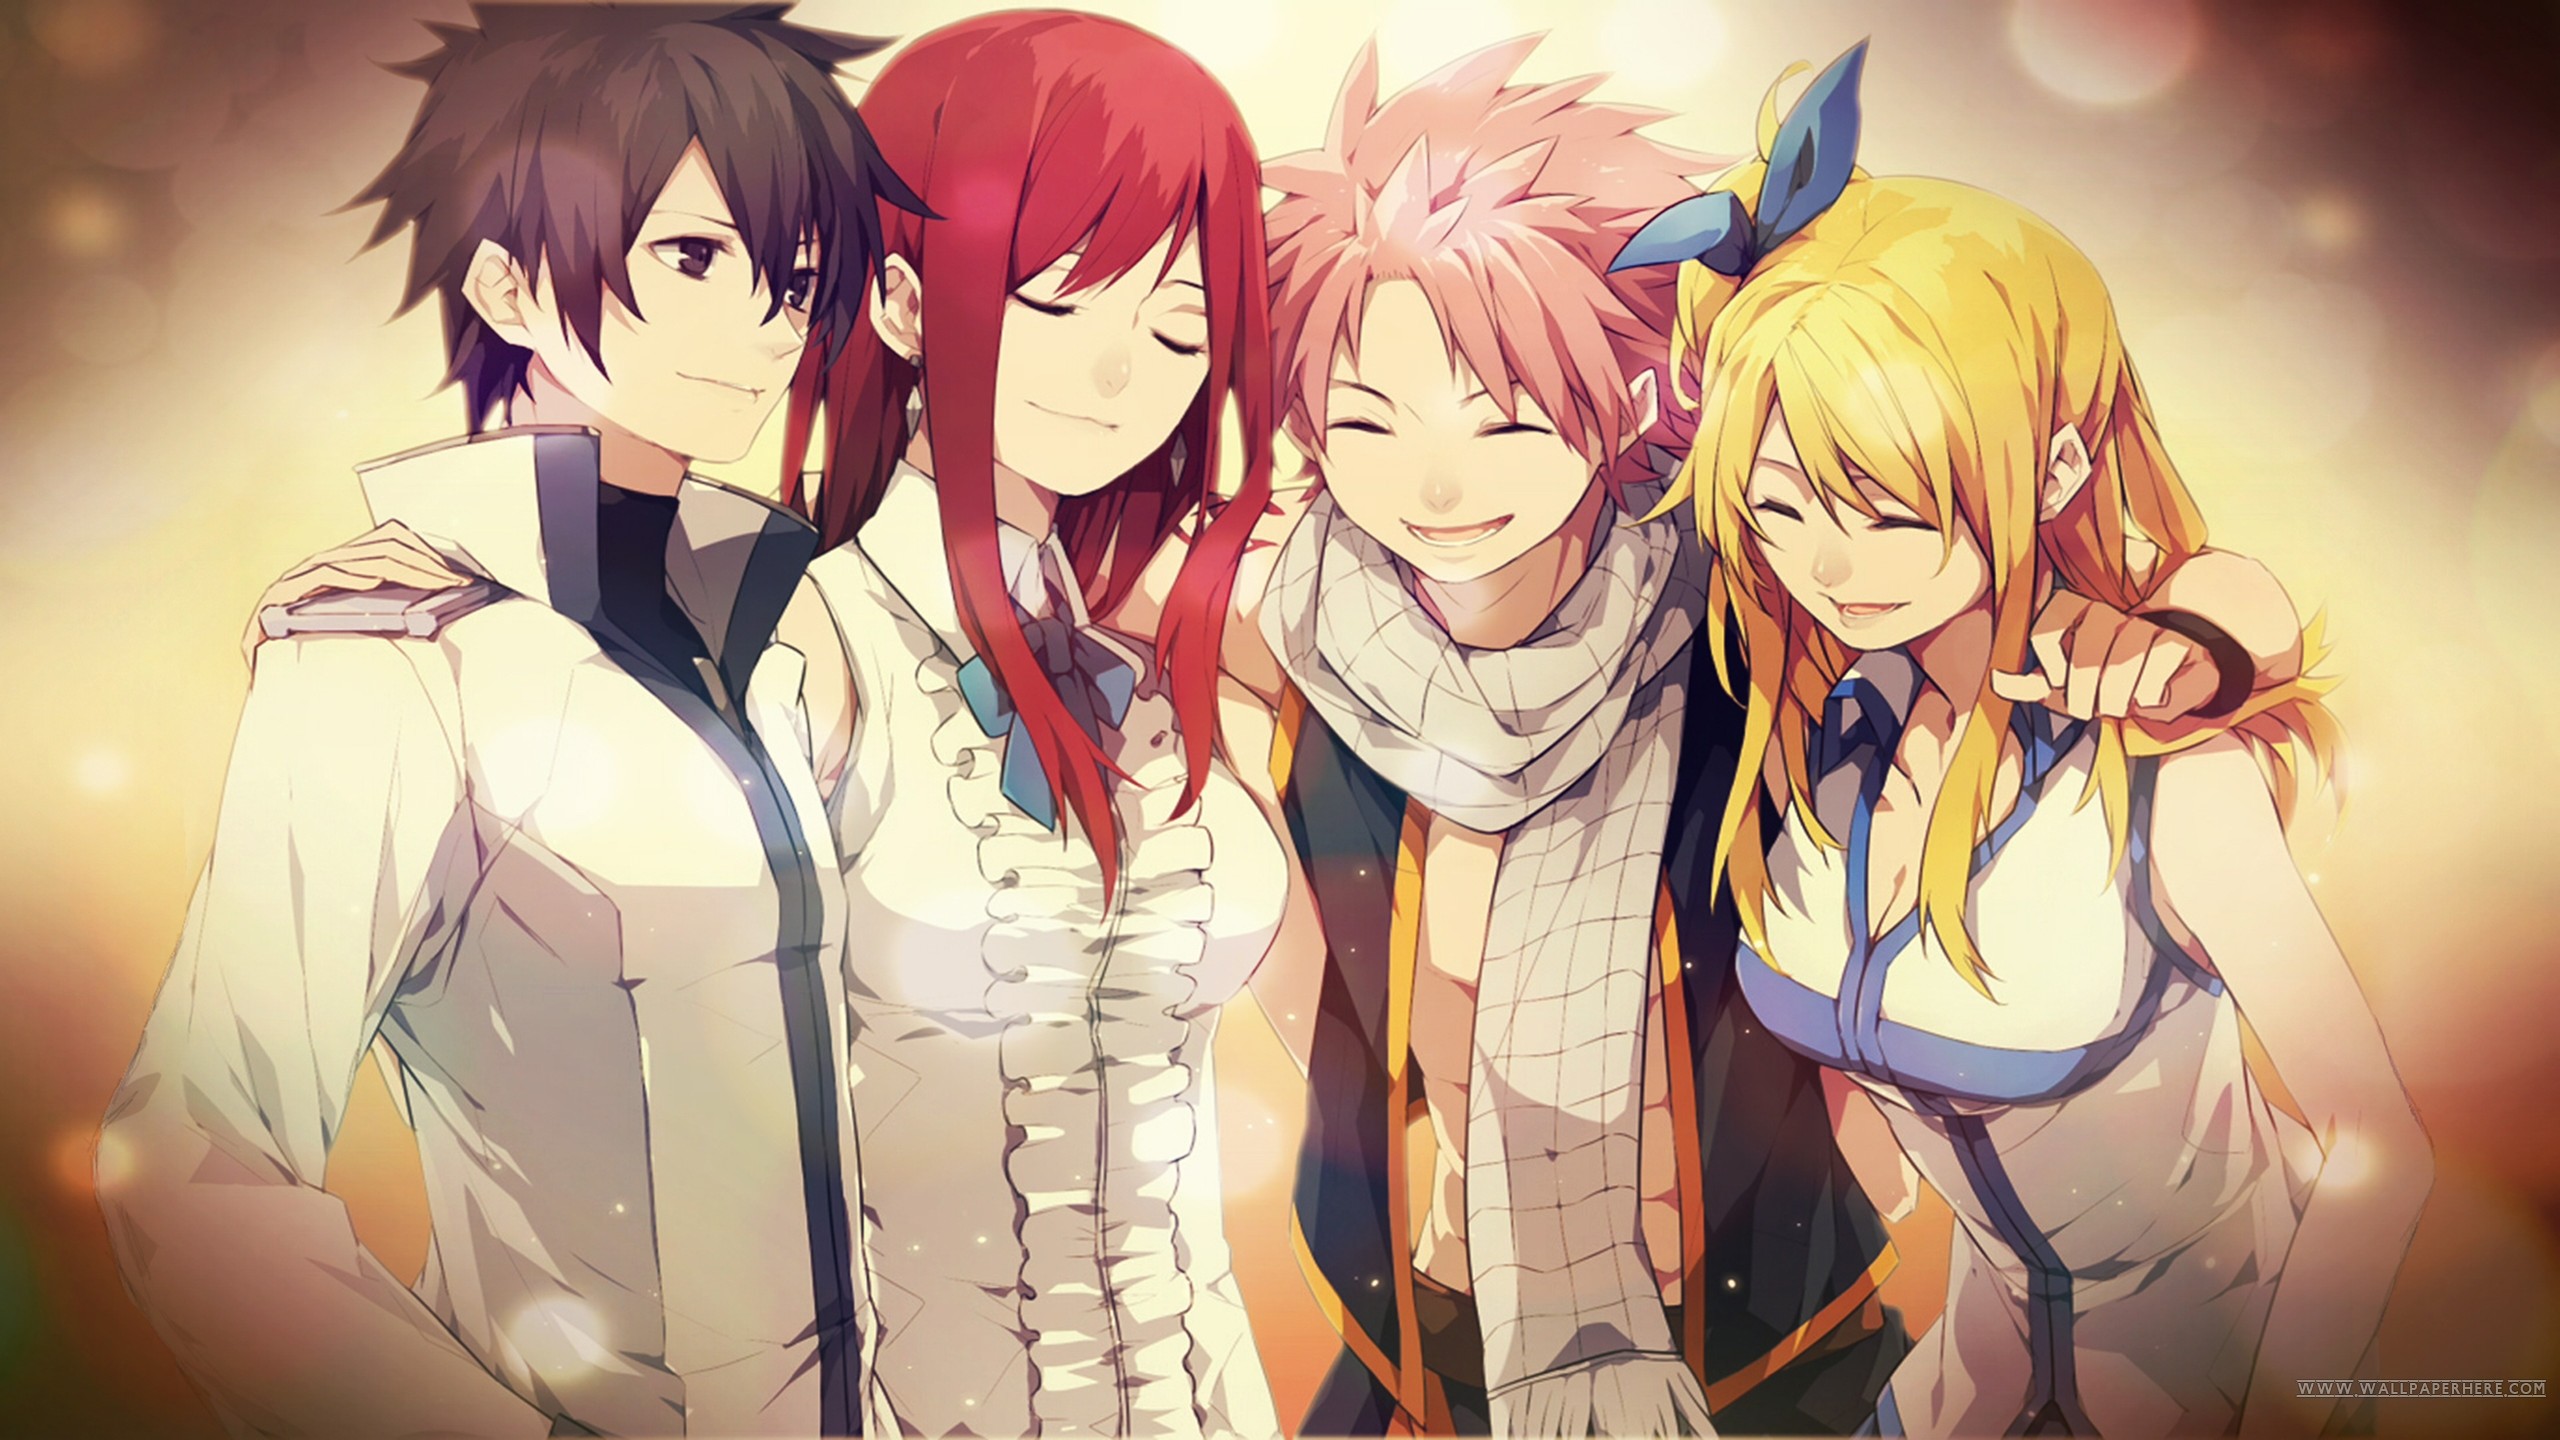 2560x1440 Fairy Tail's Strongest Team ~ Natsu Dragneel, Gray Fullbuster, Erza Scarlet  and Lucy Heatfillia